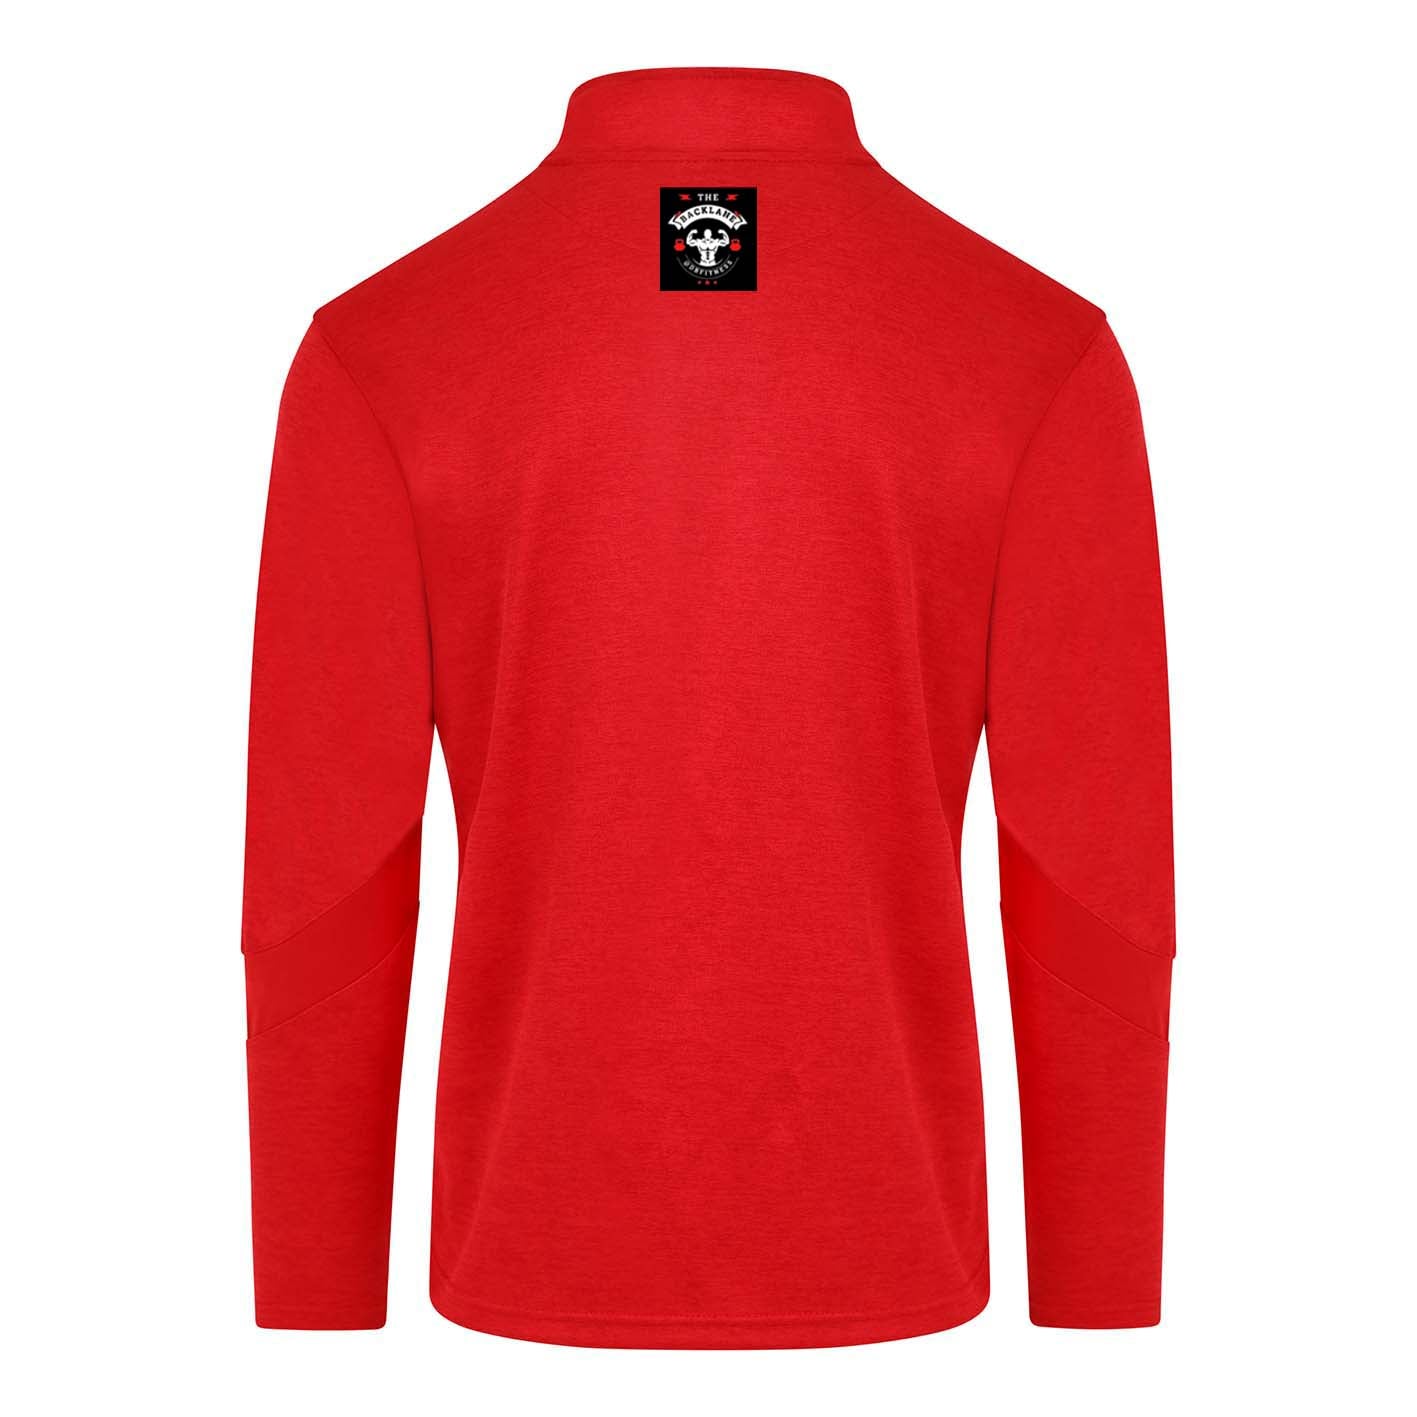 Mc Keever DB Fitness Core 22 1/4 Zip Top - Youth - Red